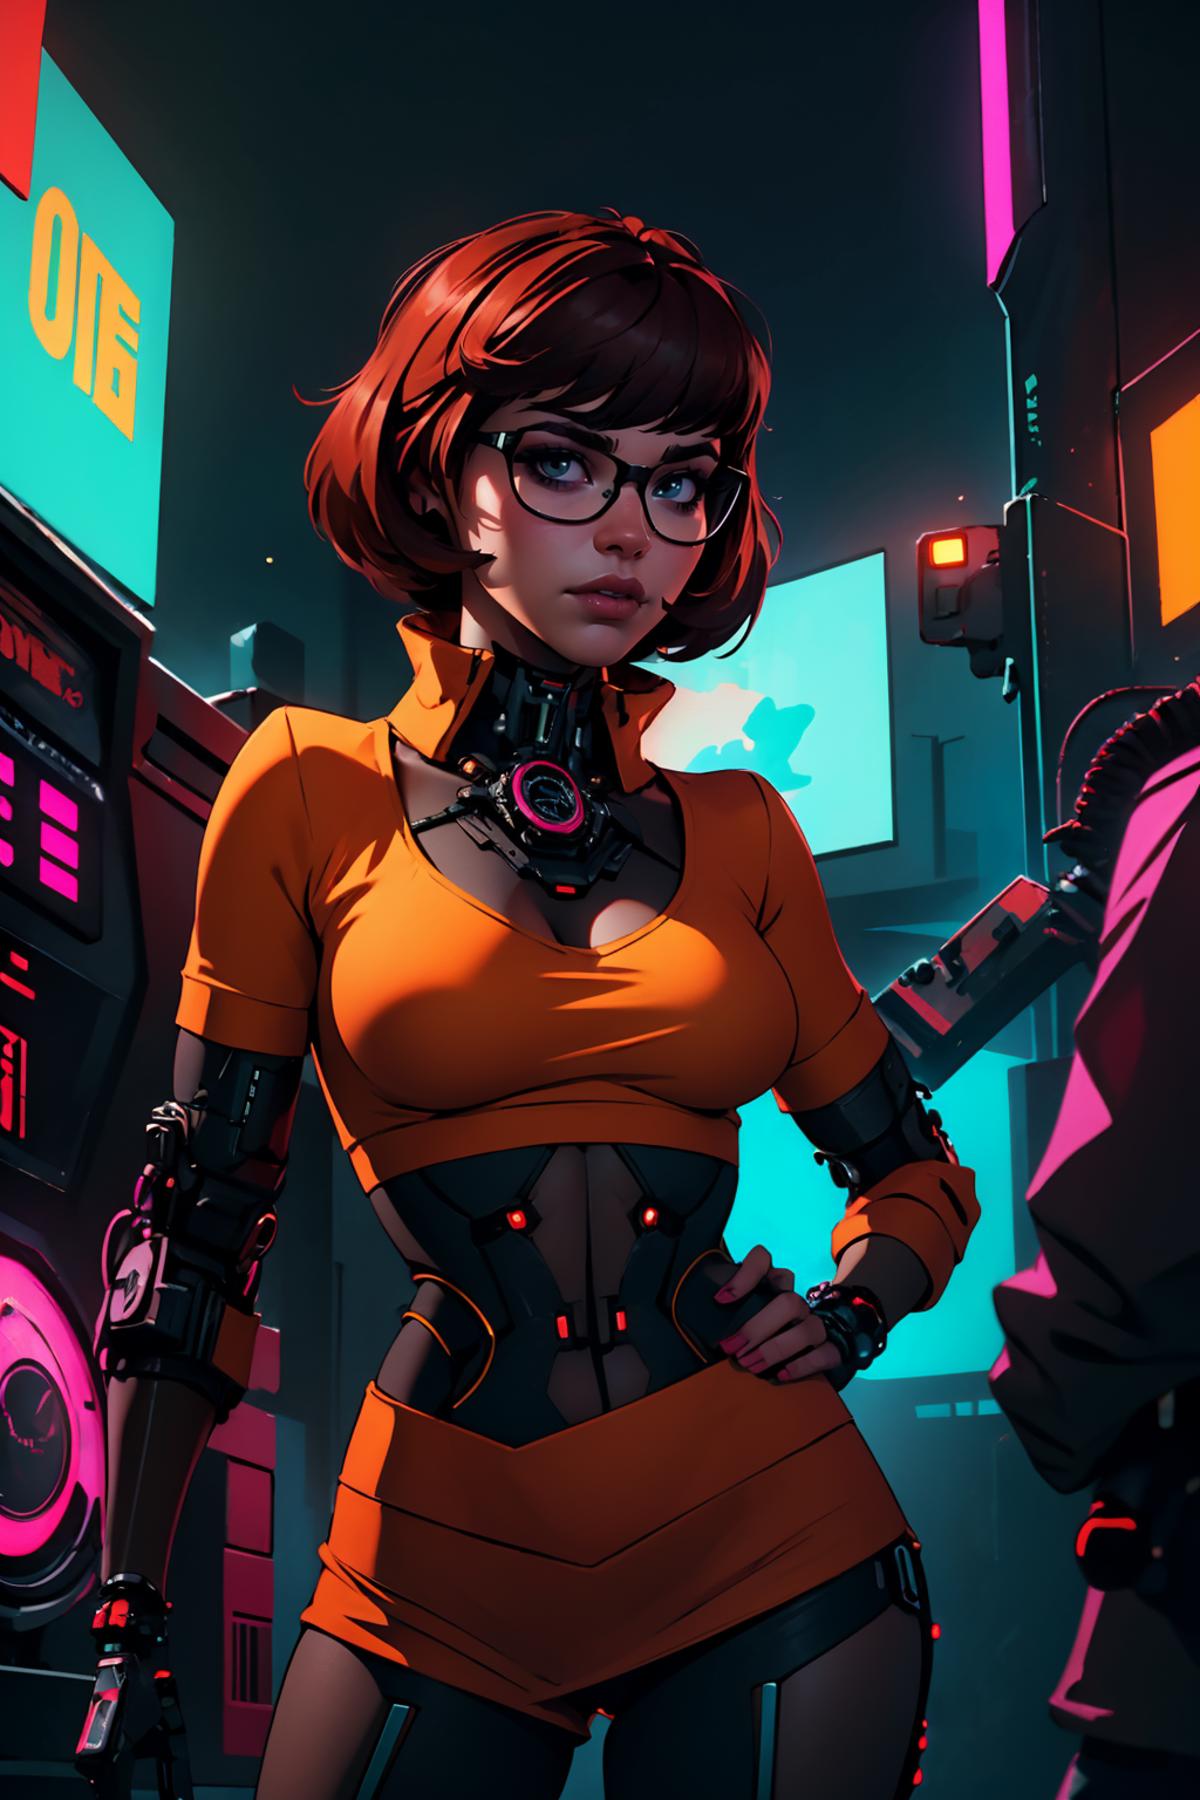 A woman wearing glasses and an orange shirt with a robotic arm.